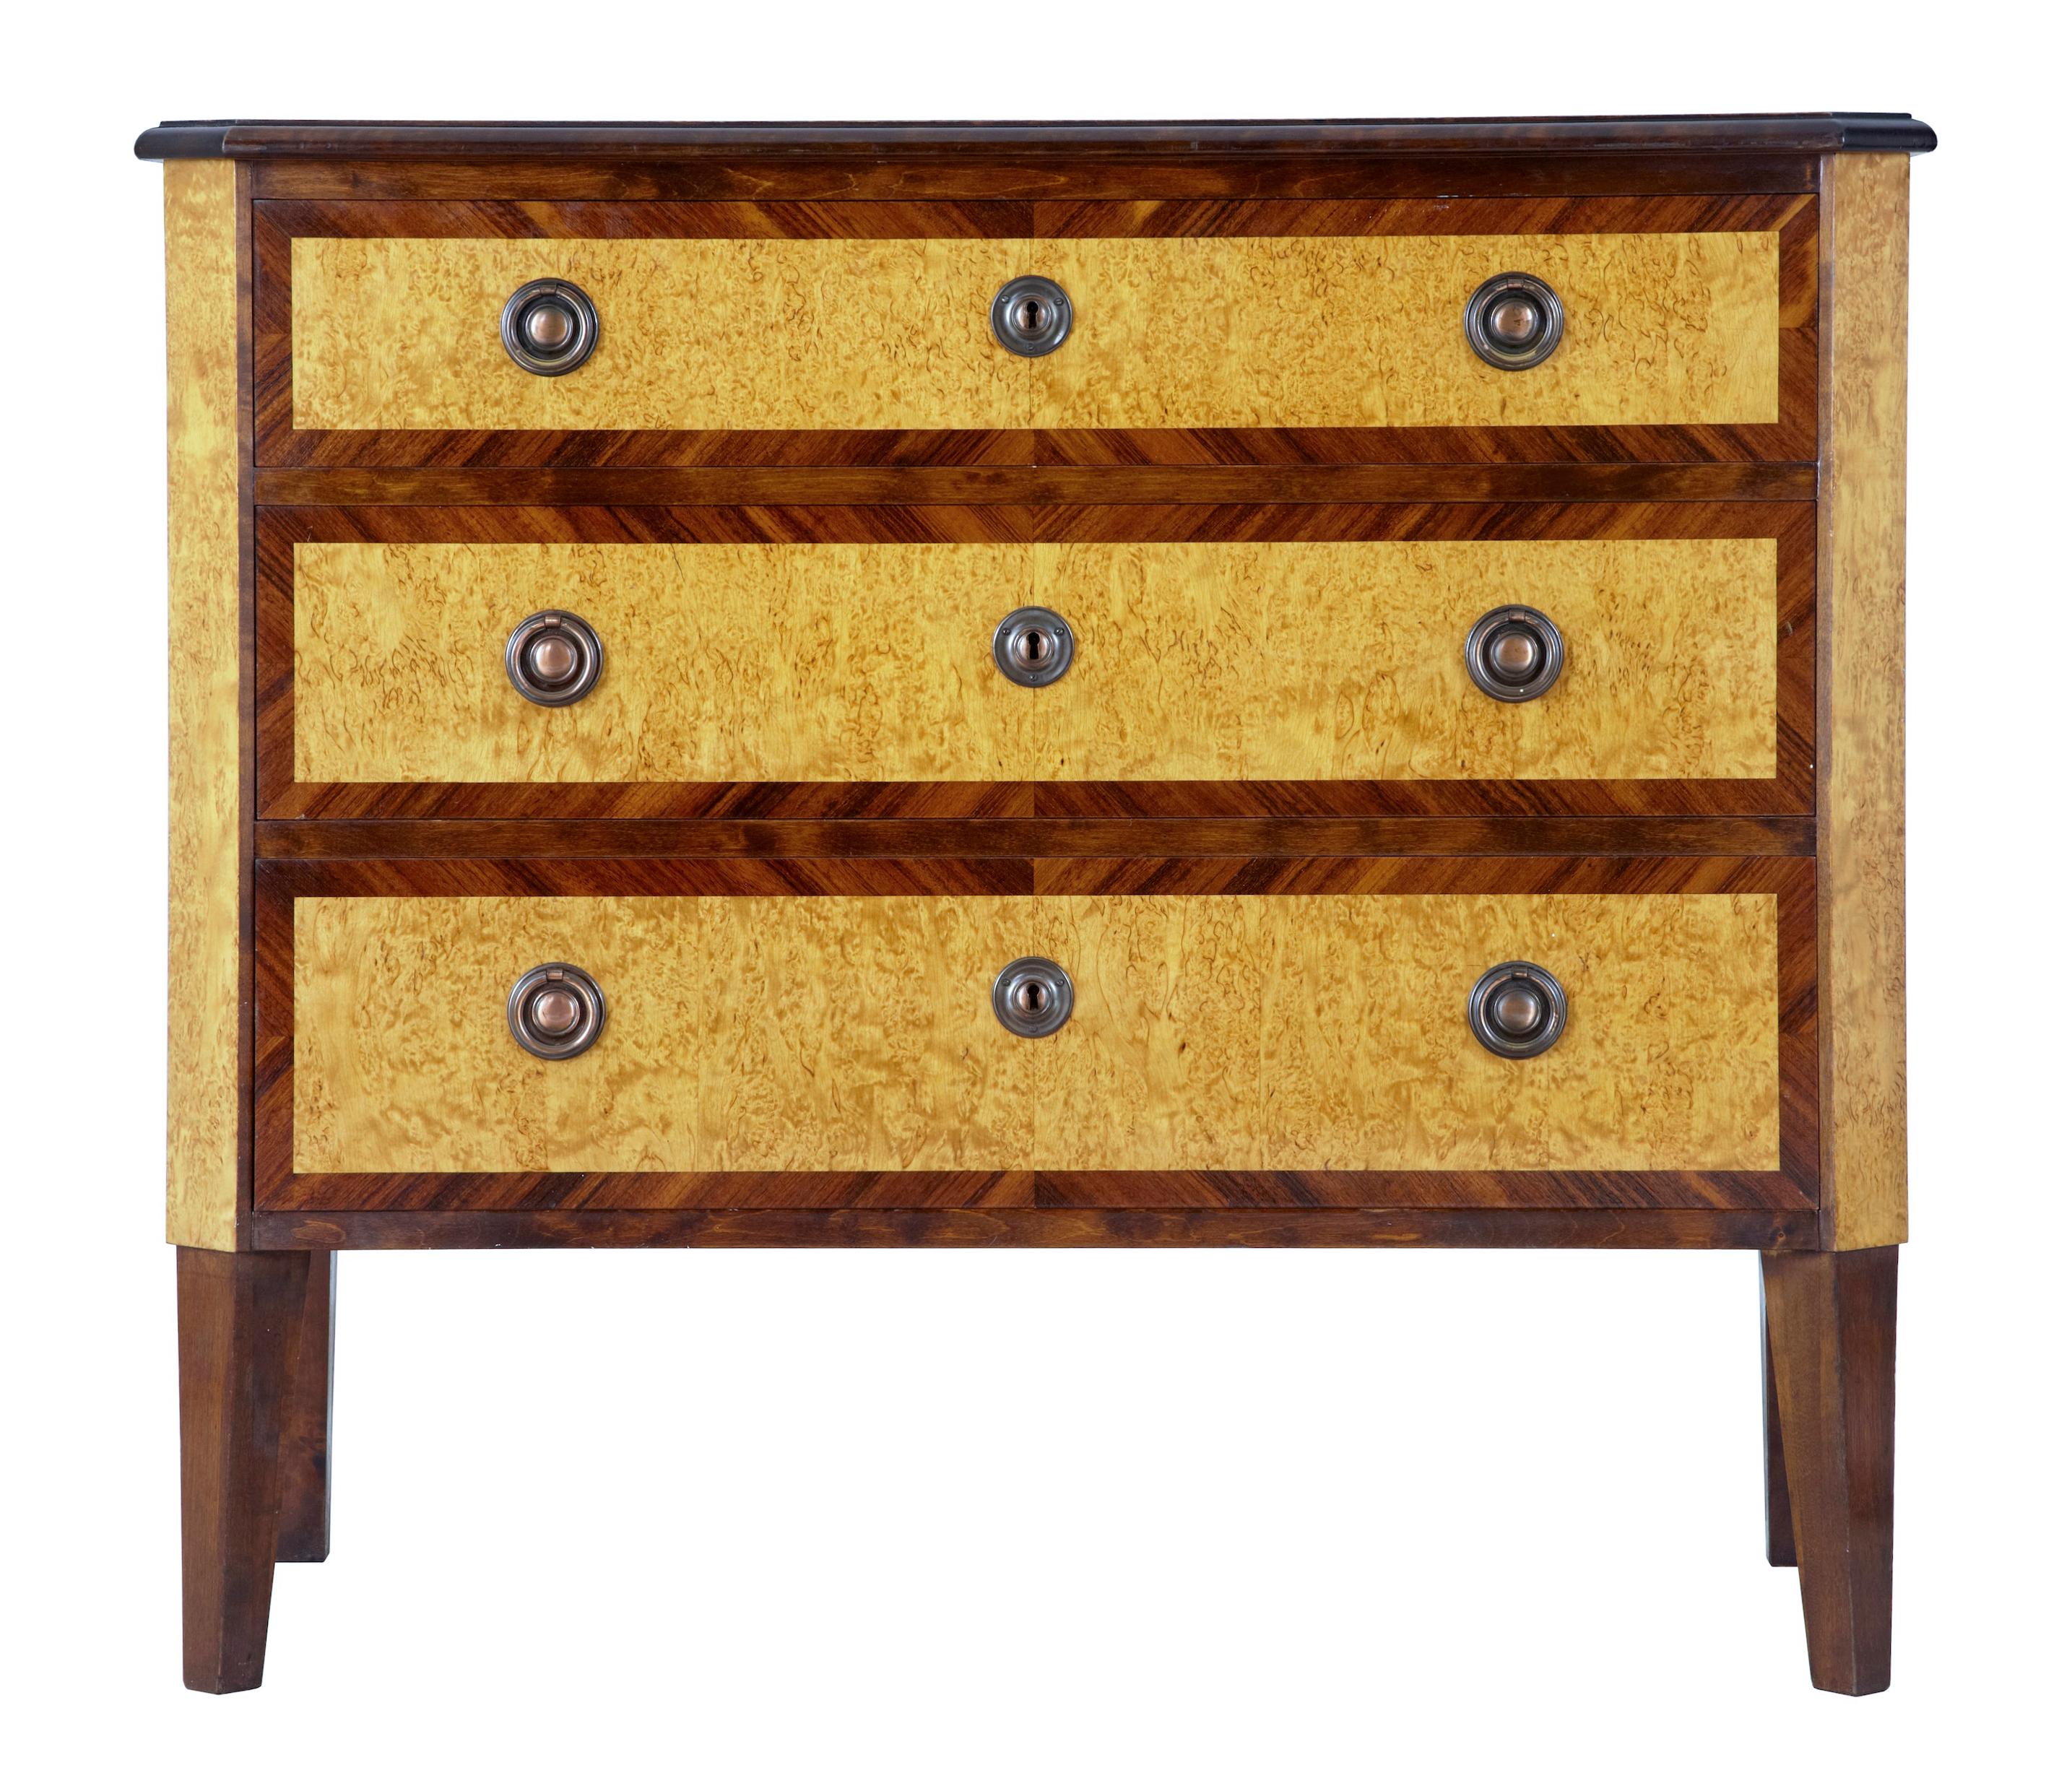 Swedish birch kingwood commode chest of drawers, circa 1920.

Fine quality graduating 3-drawer chest of drawers. Stained dark top surface and sides. Drawer fronts in golden birch with contrasting crossbanded edge fitted with ring handles and